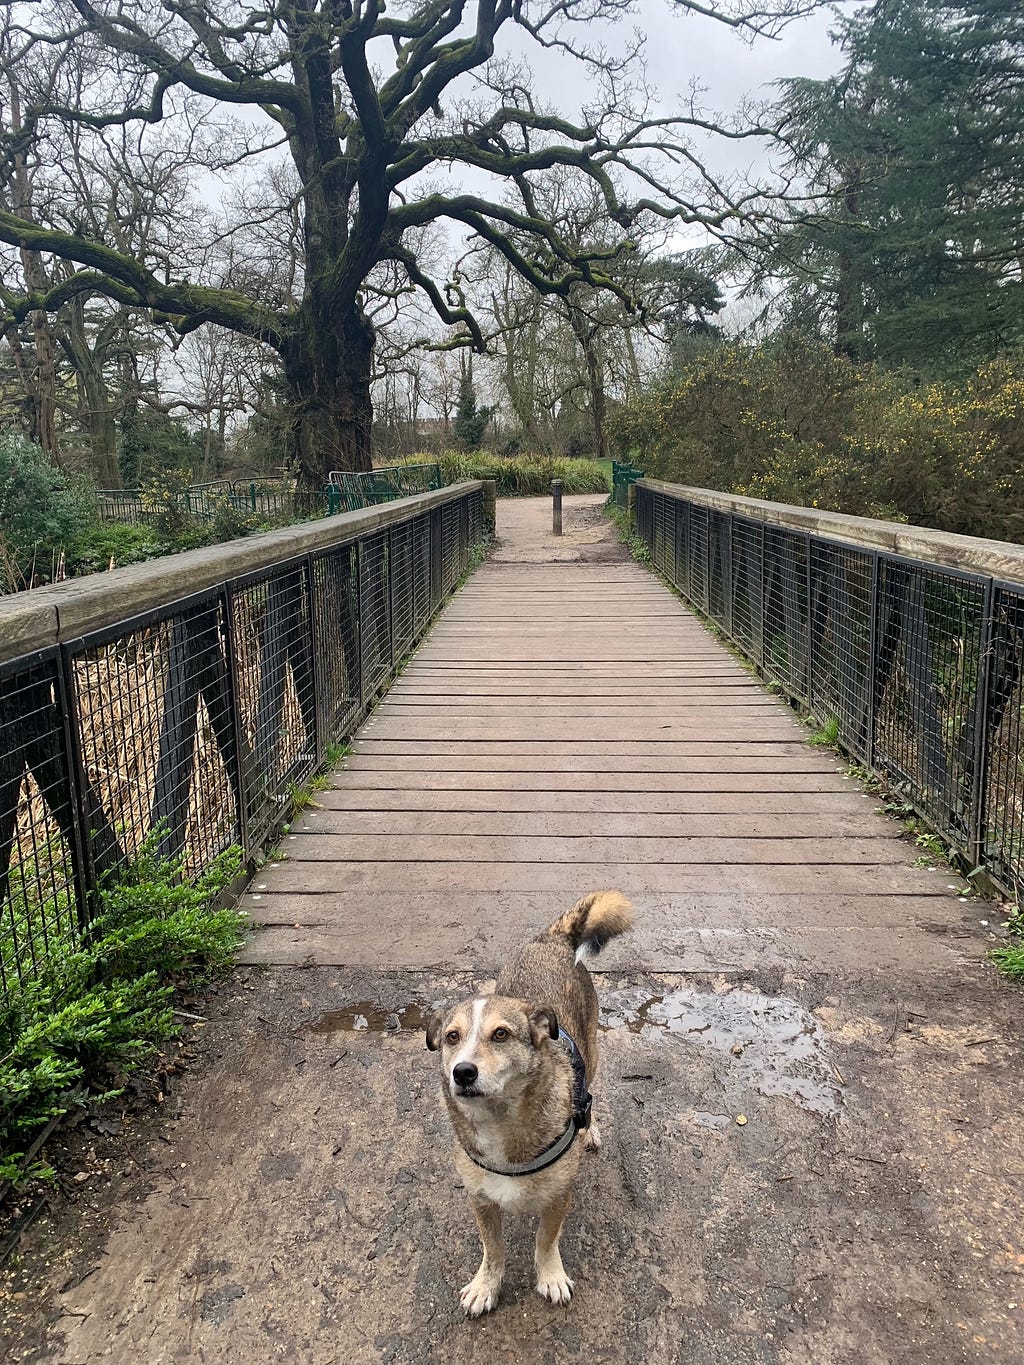 A small brown dog on a bridge at the park looking at the camera